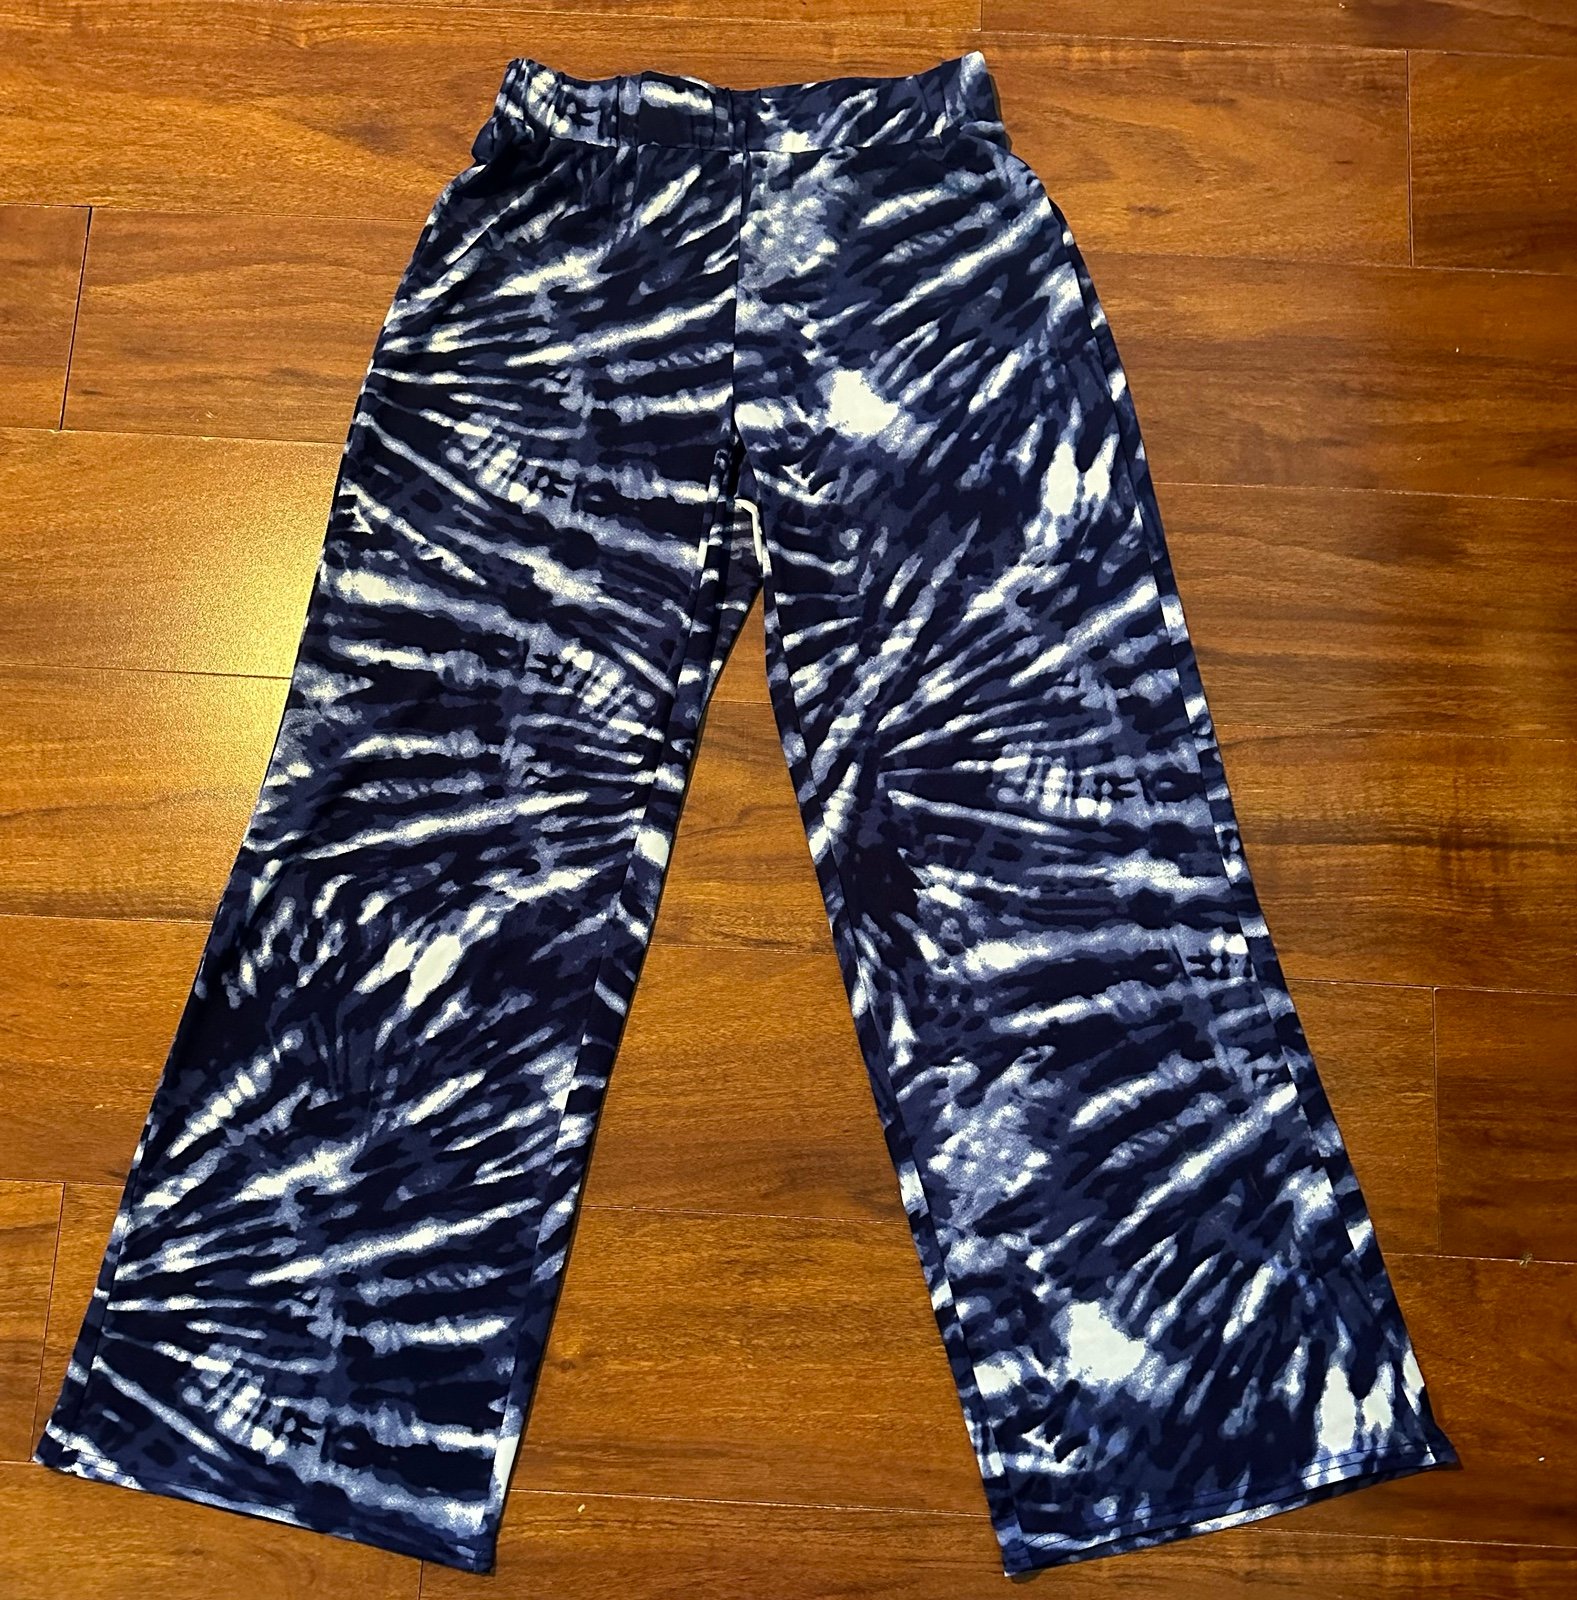 Affordable Sunny Leigh Blue & White Tie Dye Pants N4fOB